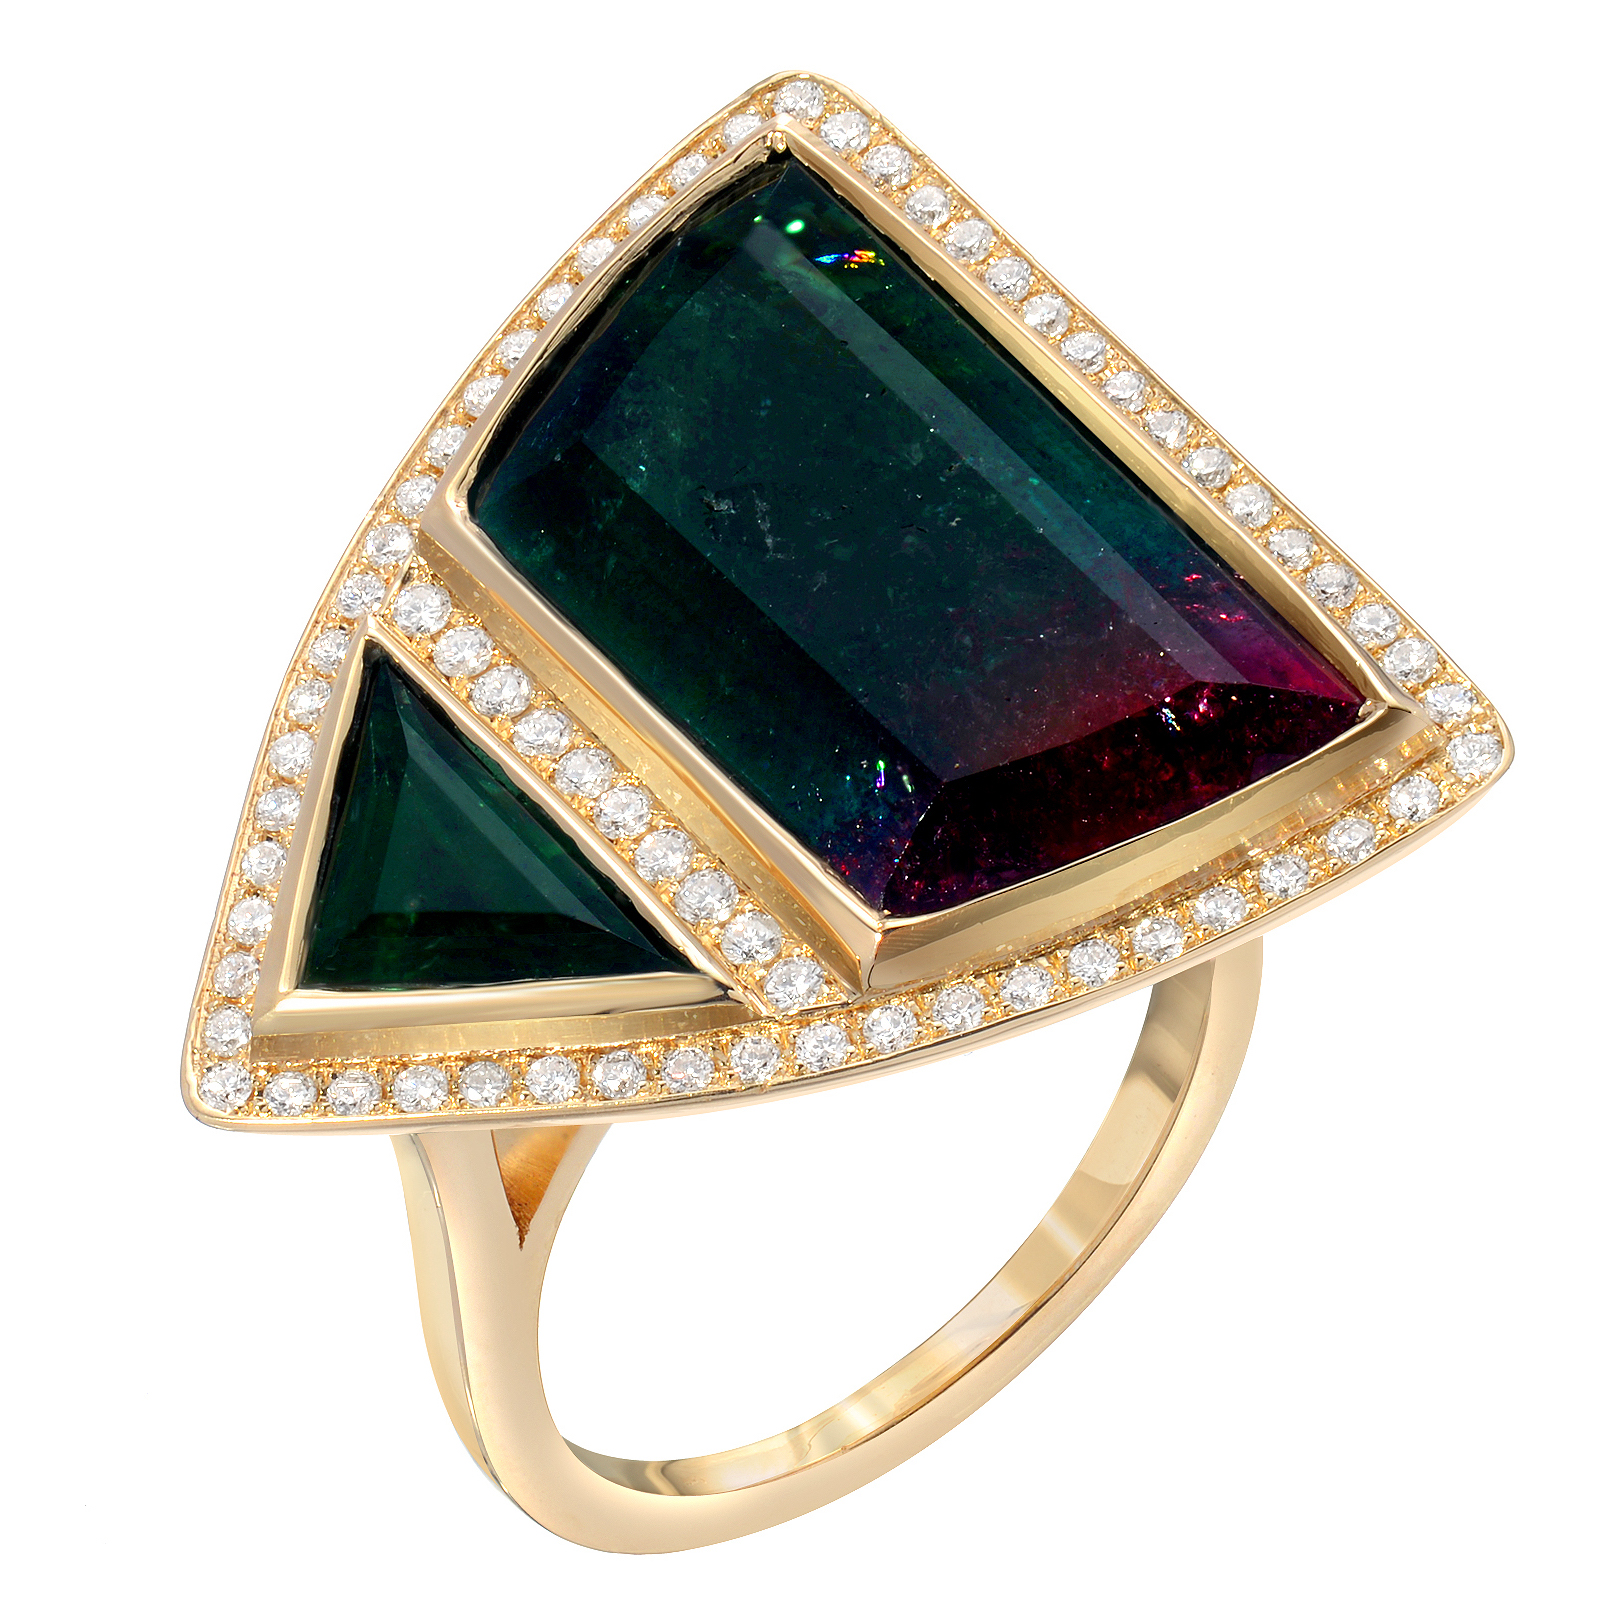 Rock and Gems Jewelry bicolor tourmaline ring | JCK On Your Market